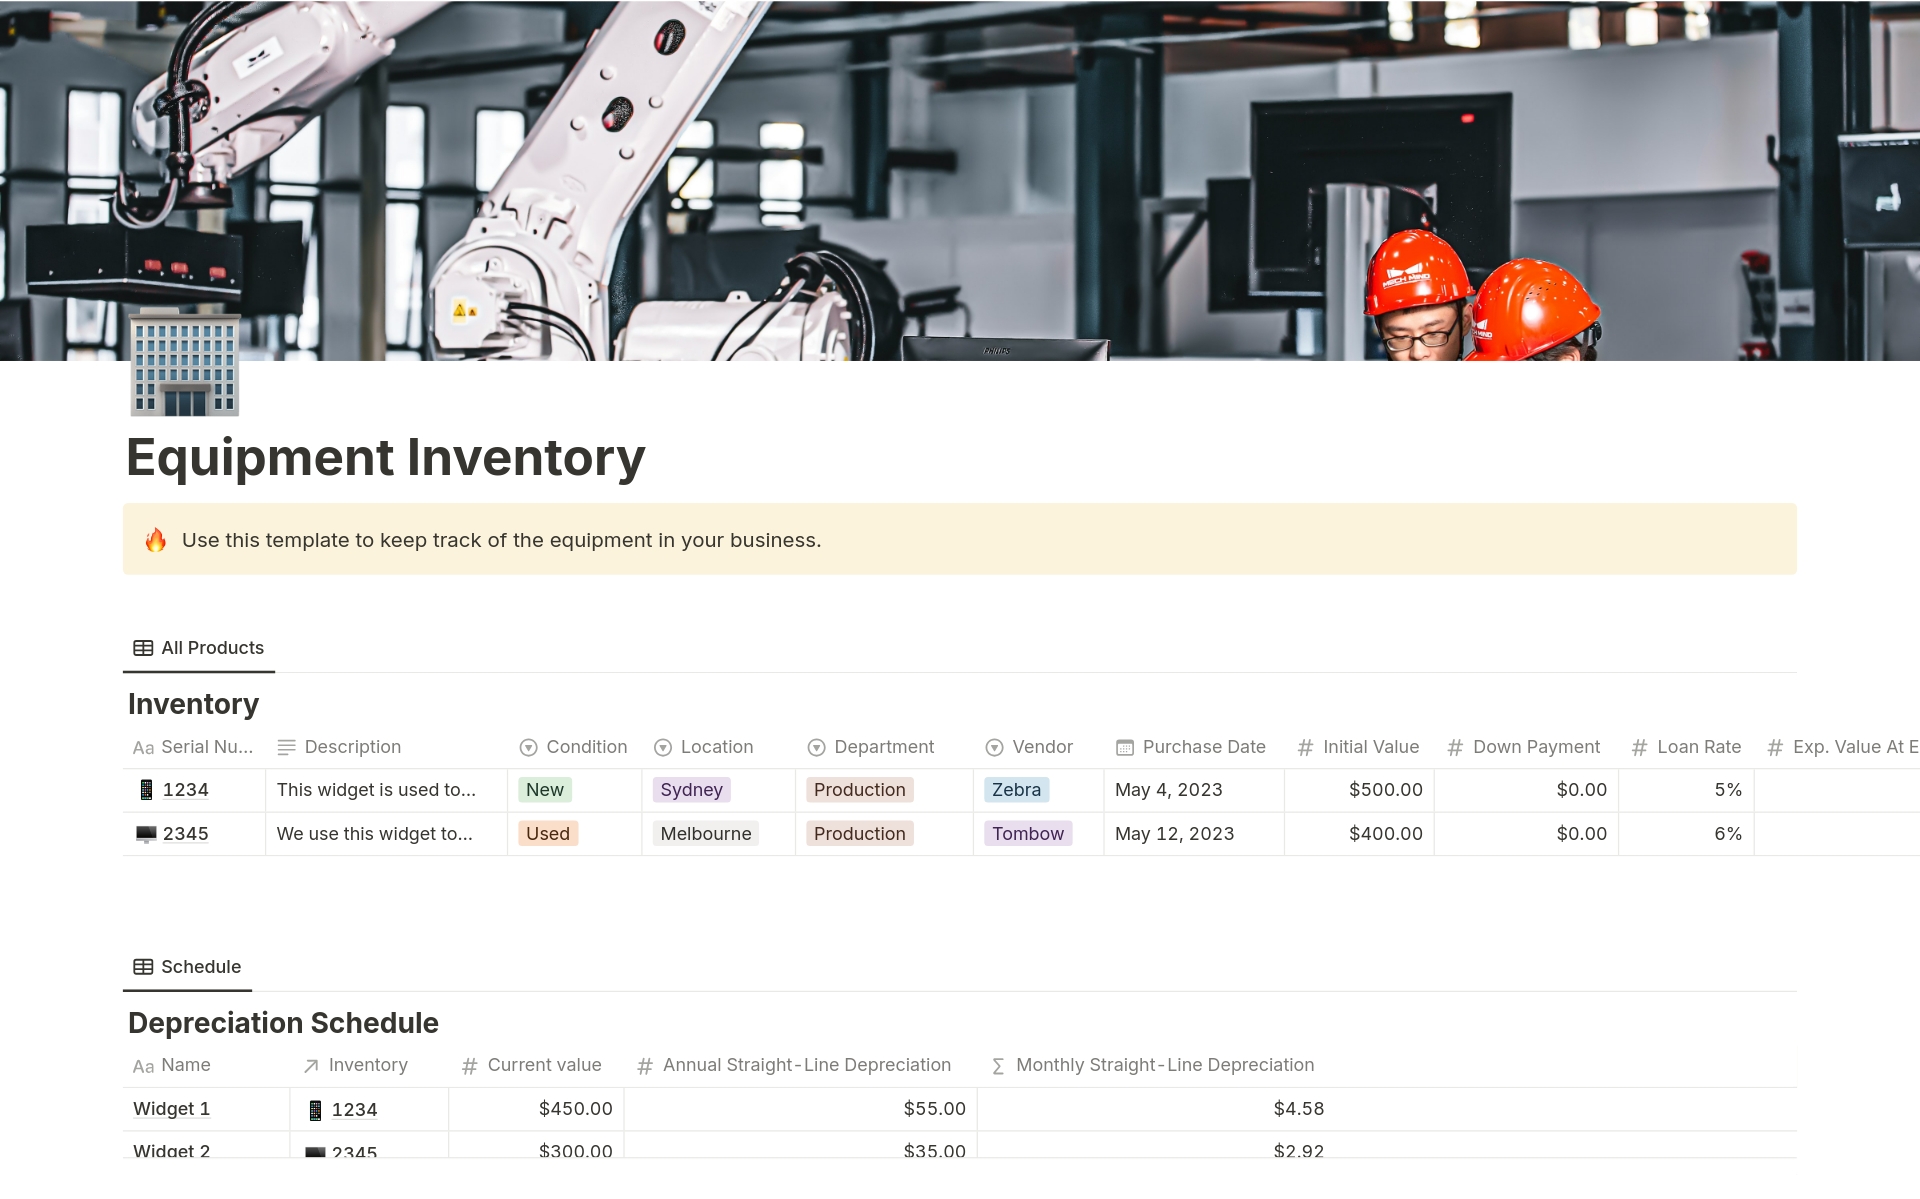 Use this template to keep track of the equipment in your business.